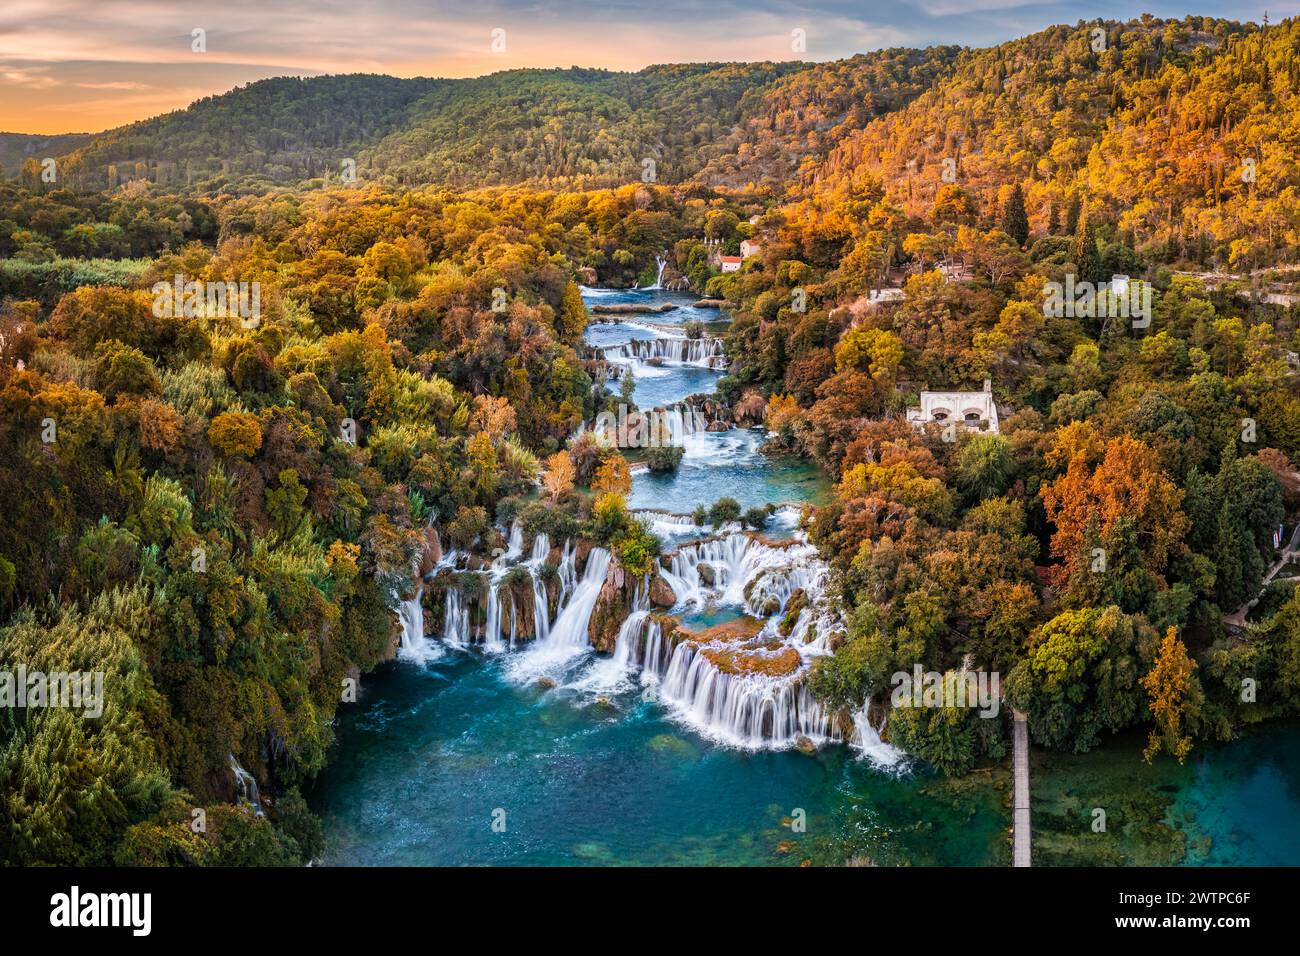 Krka, Croatia - Aerial panoramic view of the beautiful Krka Waterfalls in Krka National Park on a sunny autumn morning with colorful autumn foliage an Stock Photo